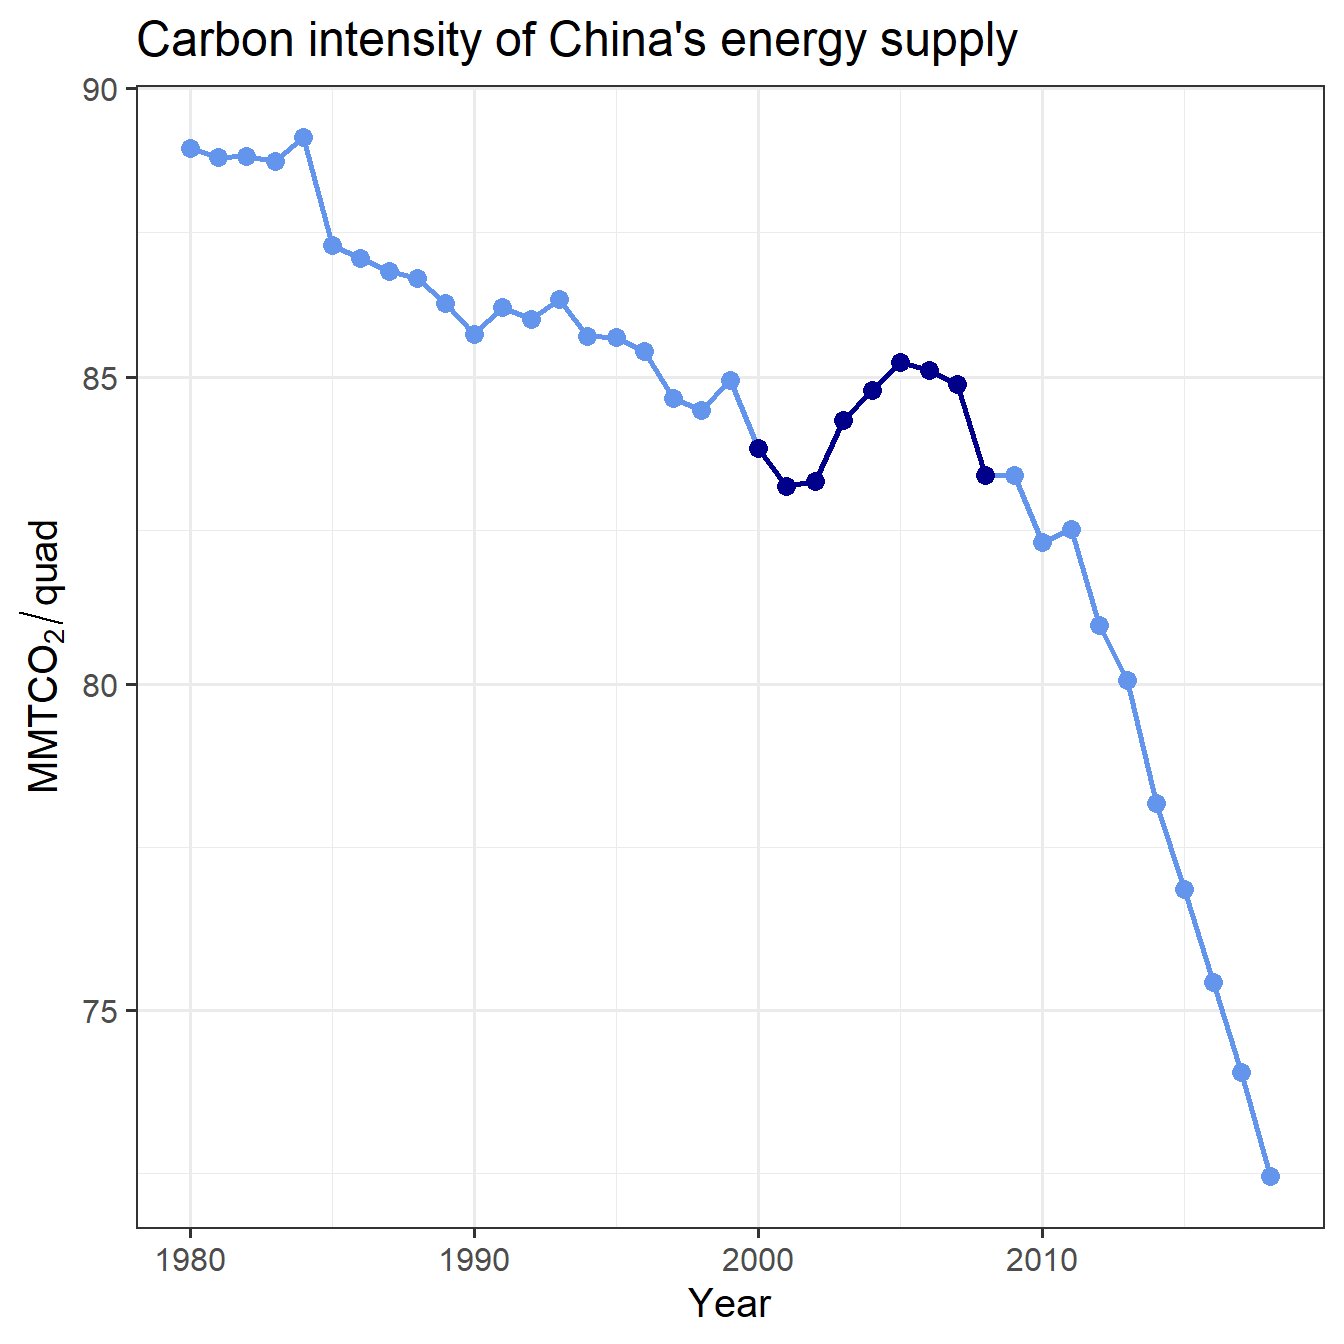 Trend of China's carbon intensity, with 2000--2008 highlighted.